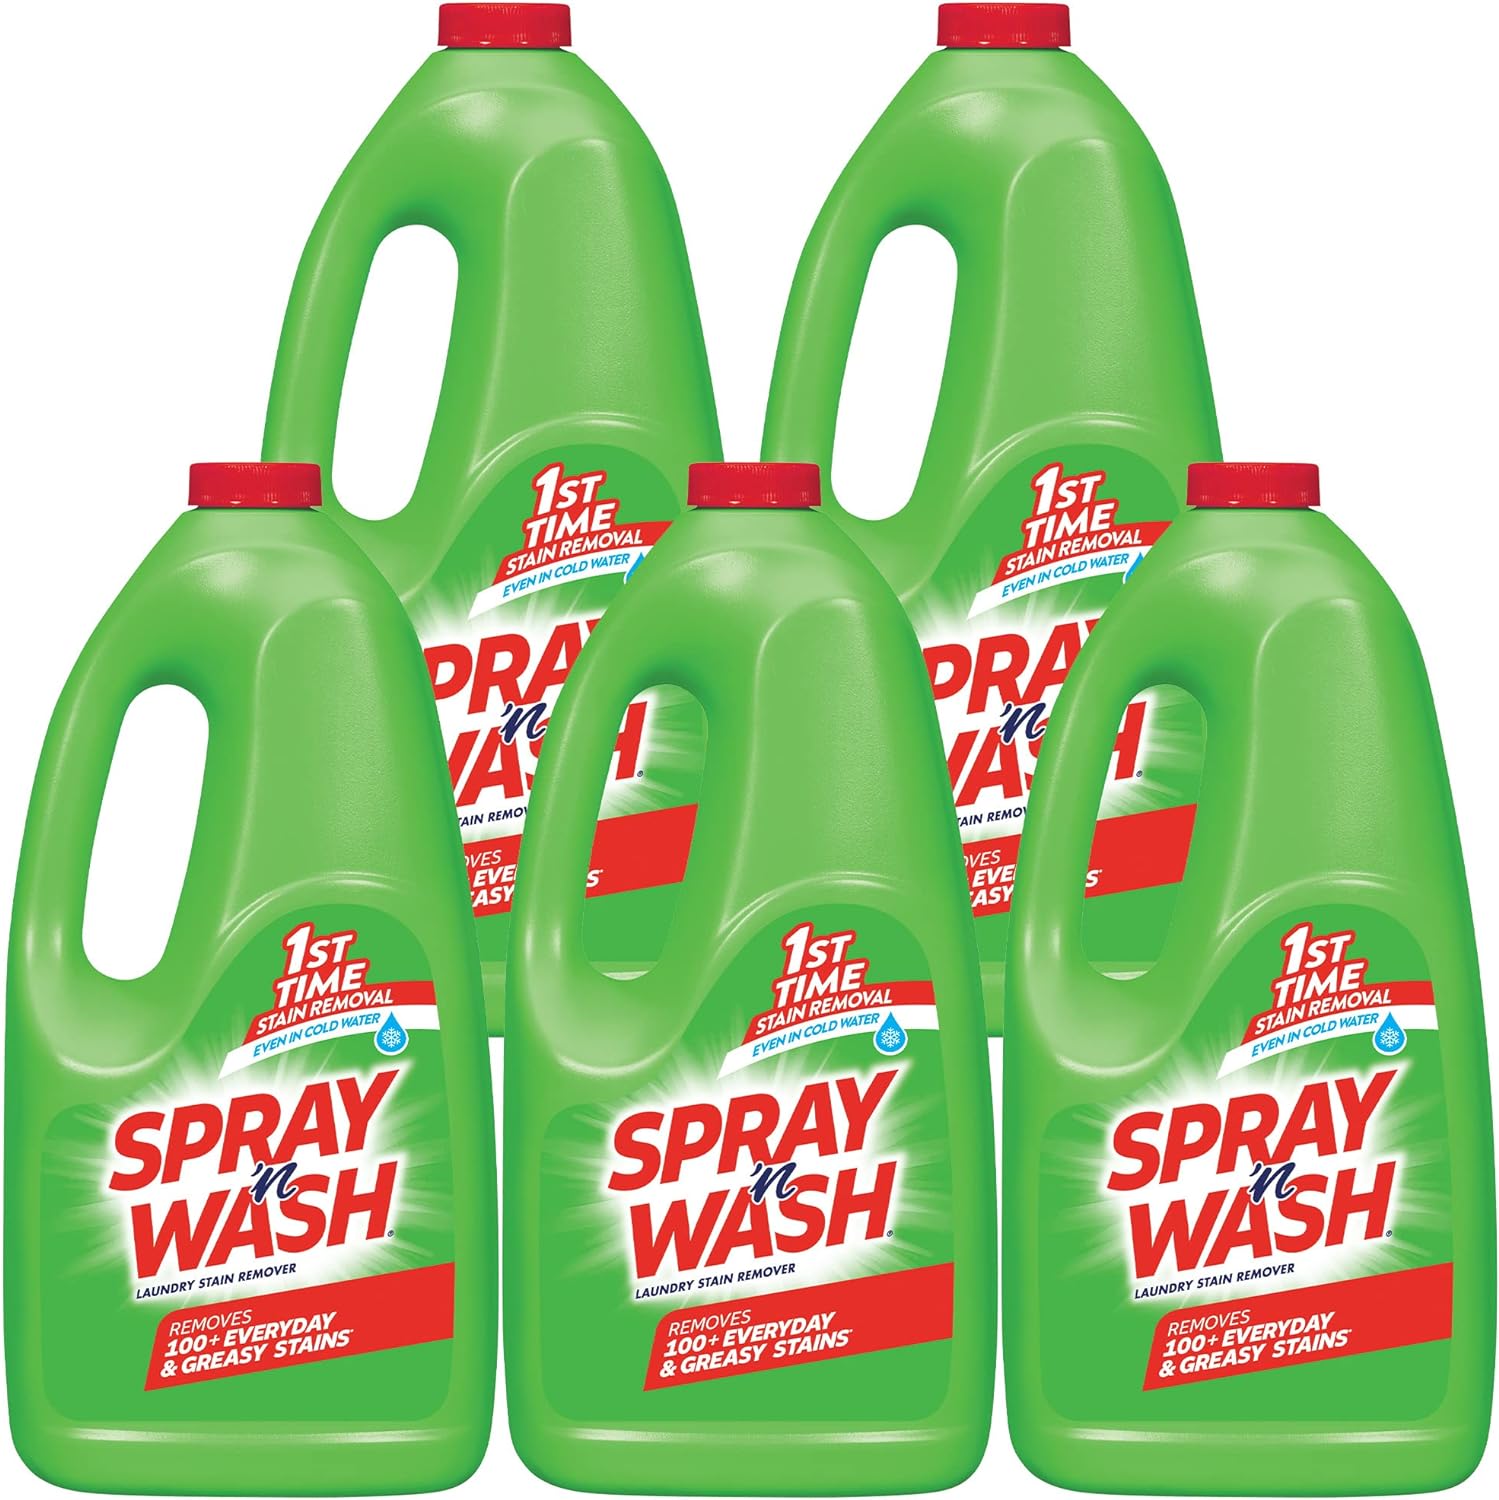 Spray 'n Wash Pre-Treat Laundry Stain Remover Refill 60 Ounce (Pack of 5)